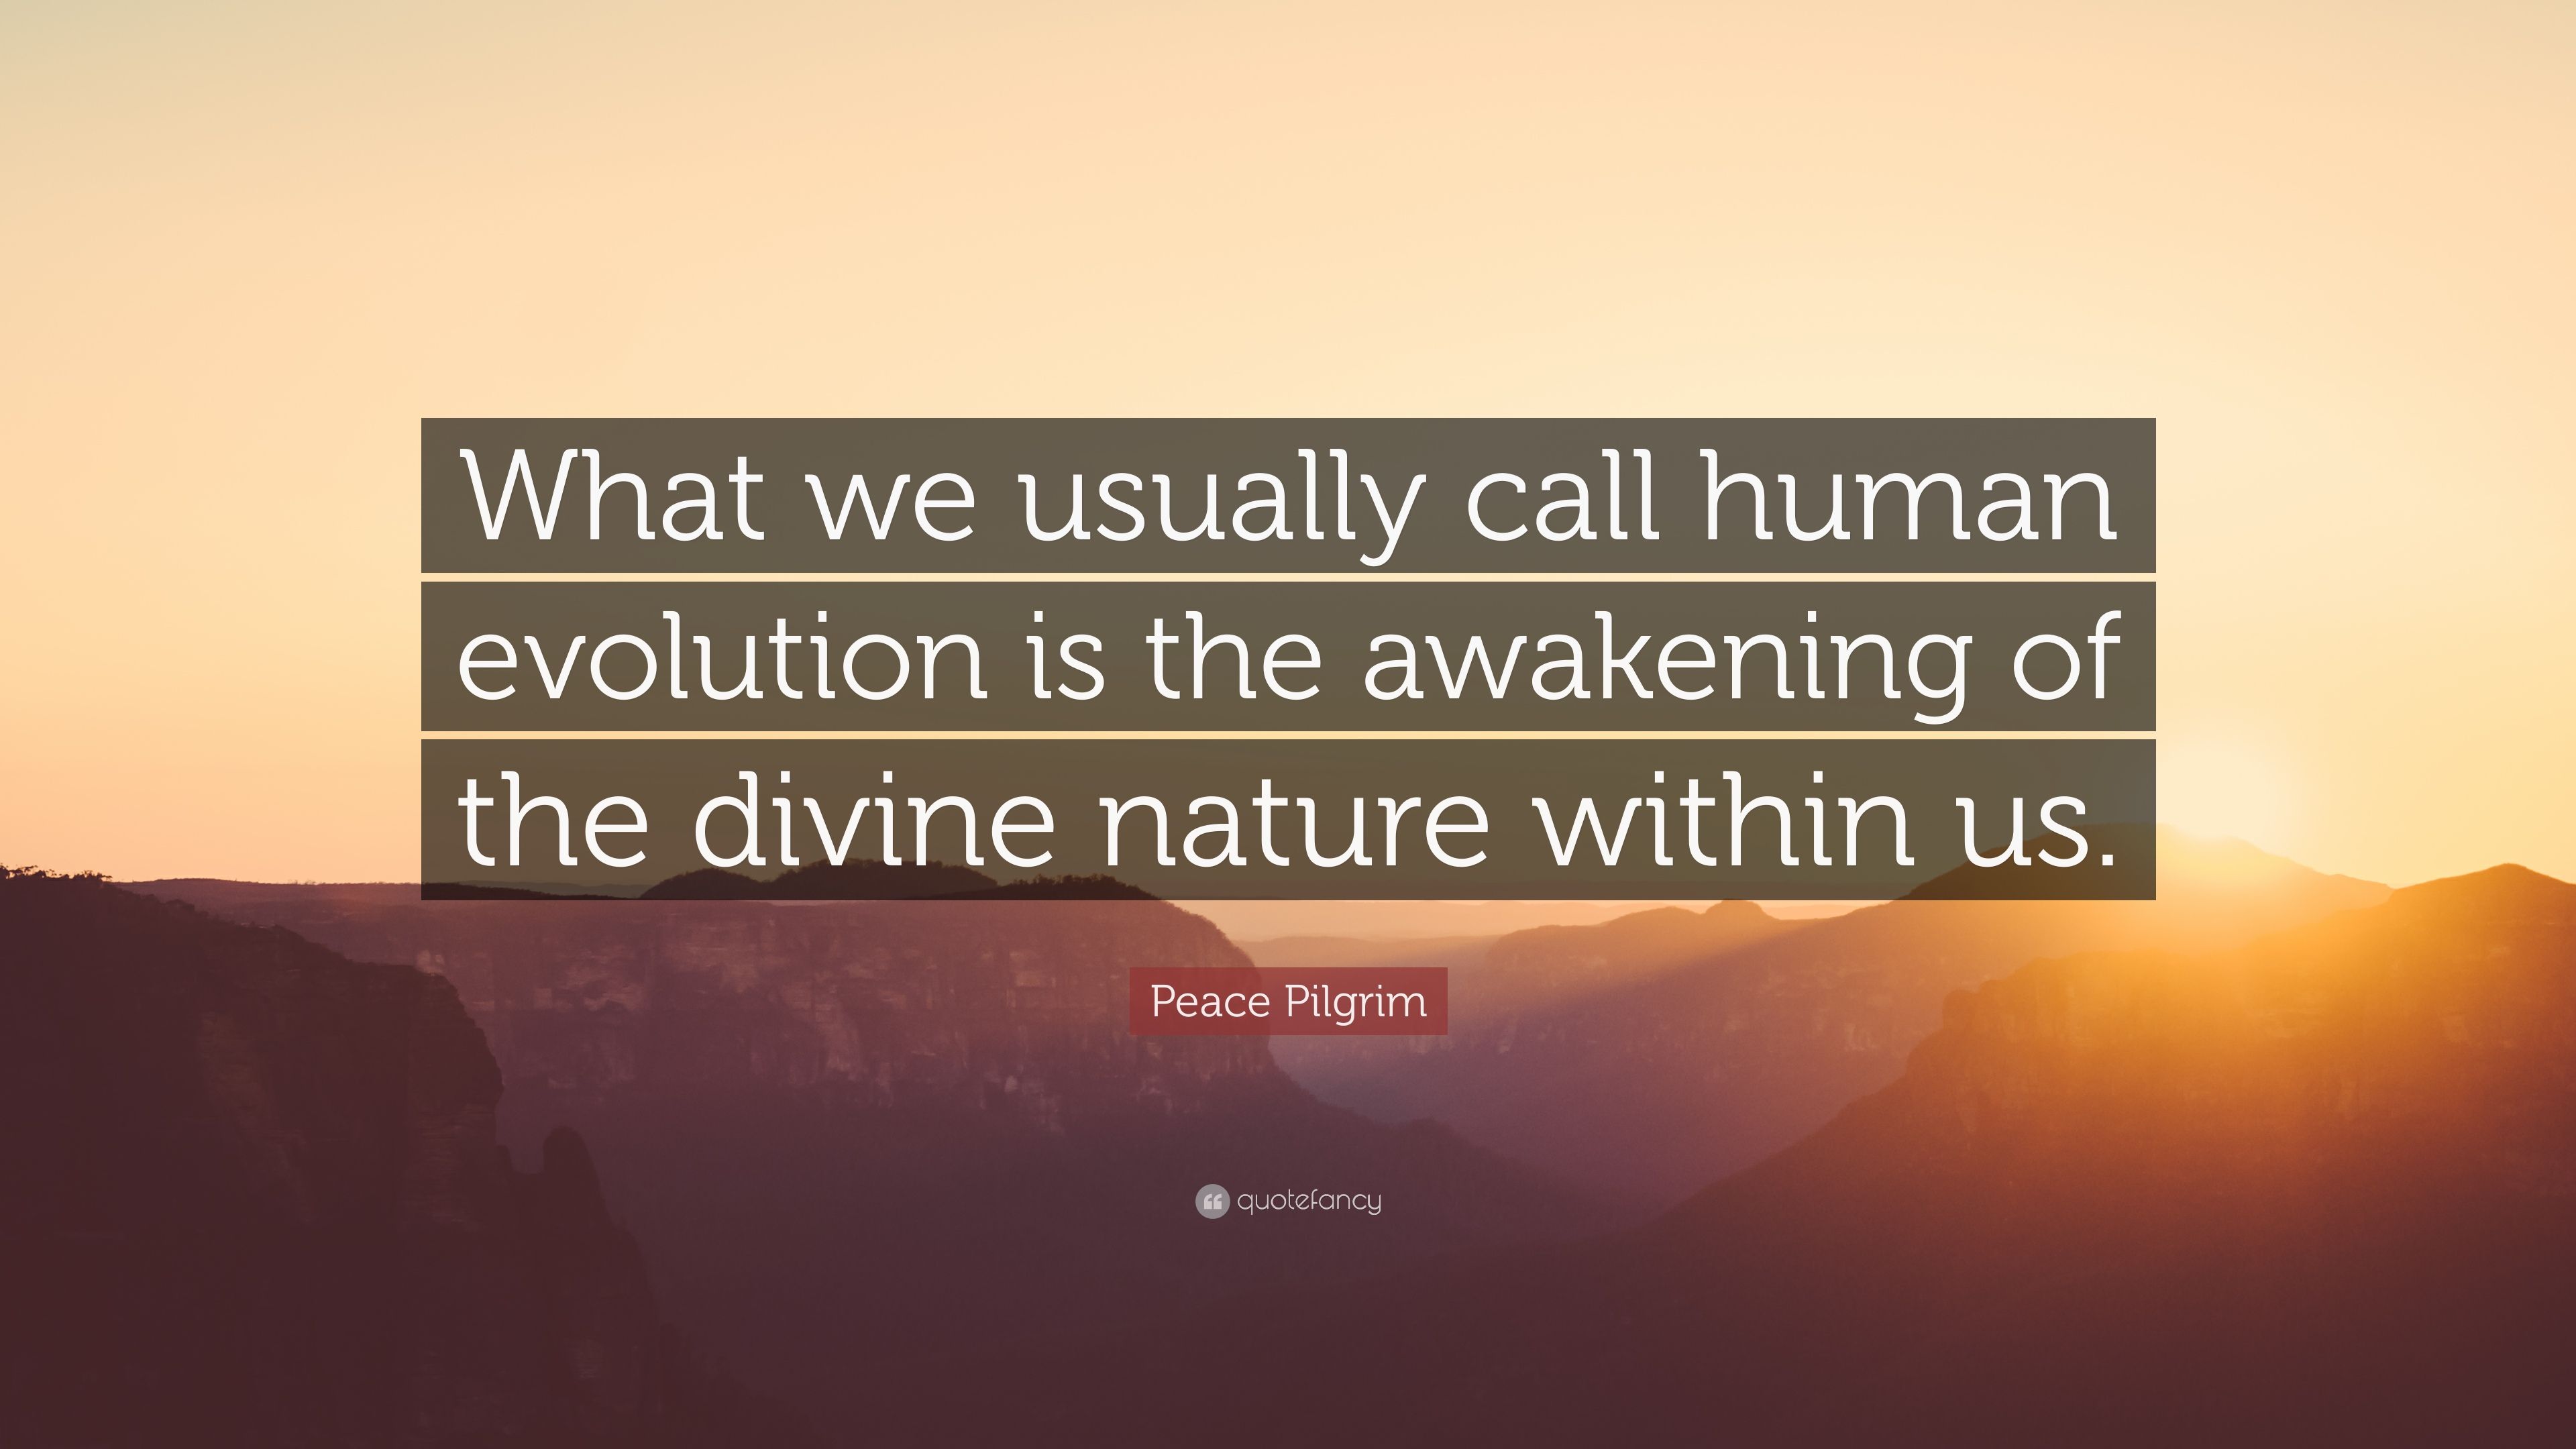 Peace Pilgrim Quote: “What we usually call human evolution is